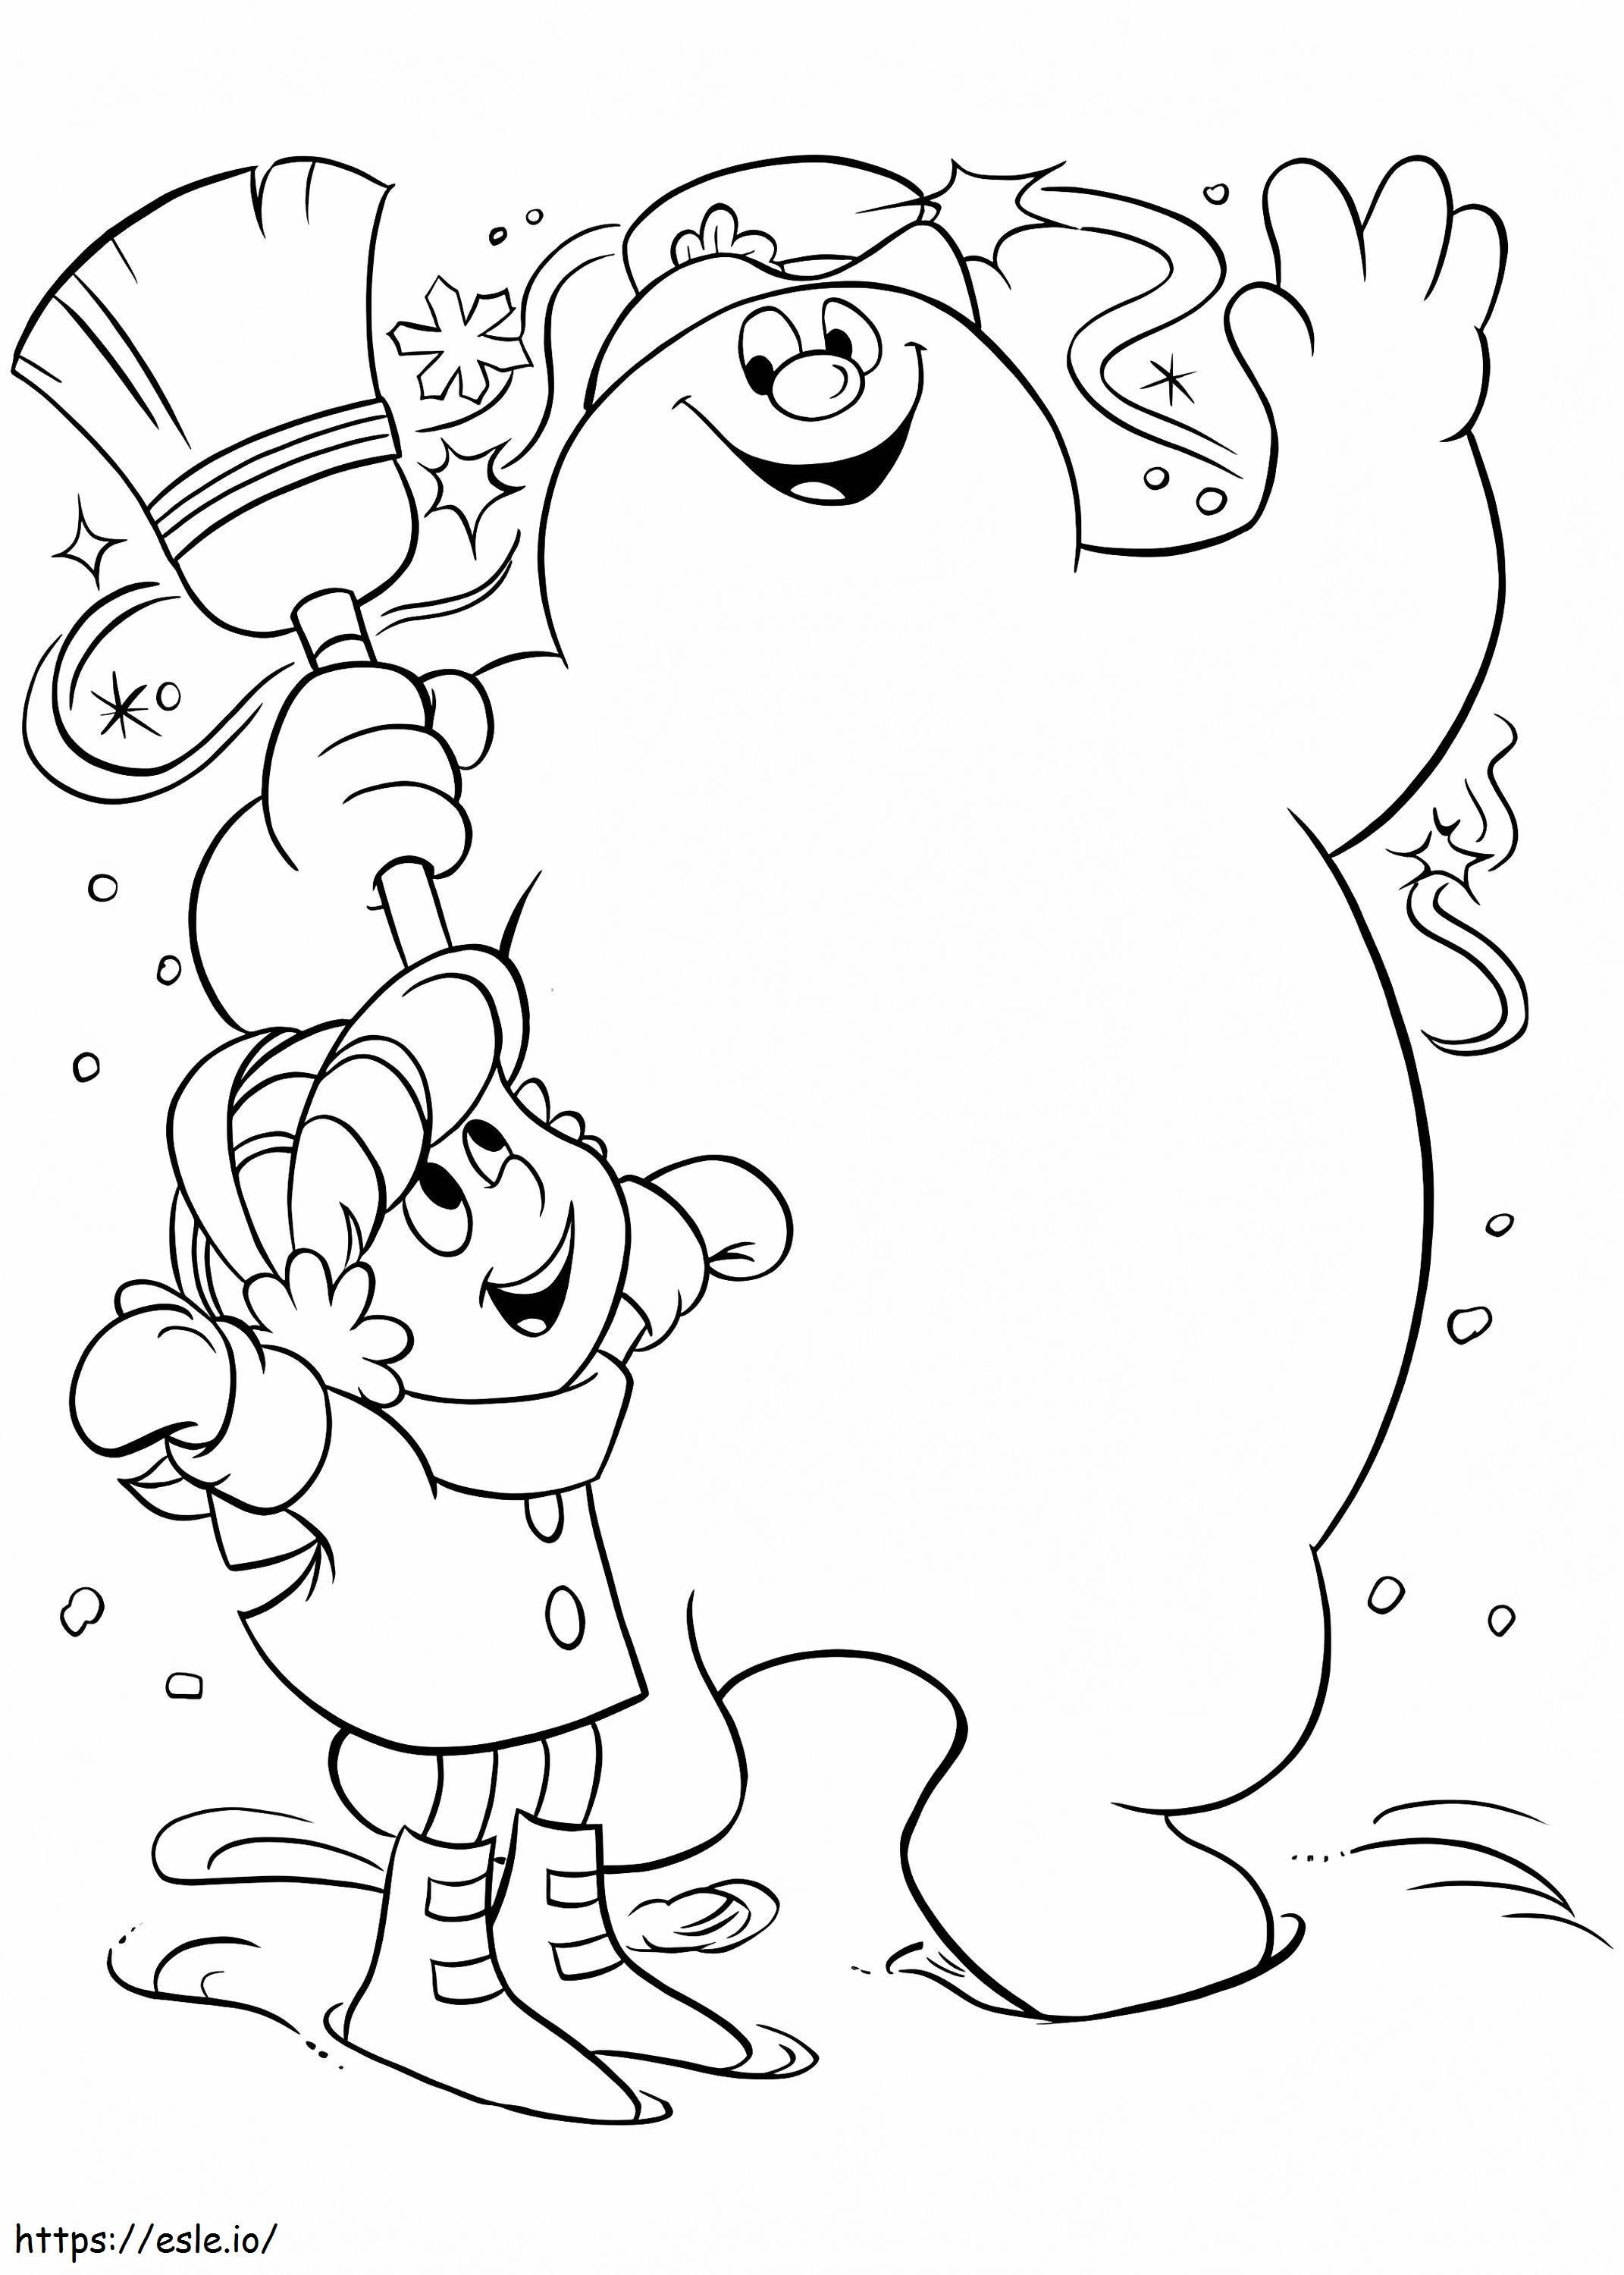 1535706992 Karen And Frosty A4 coloring page